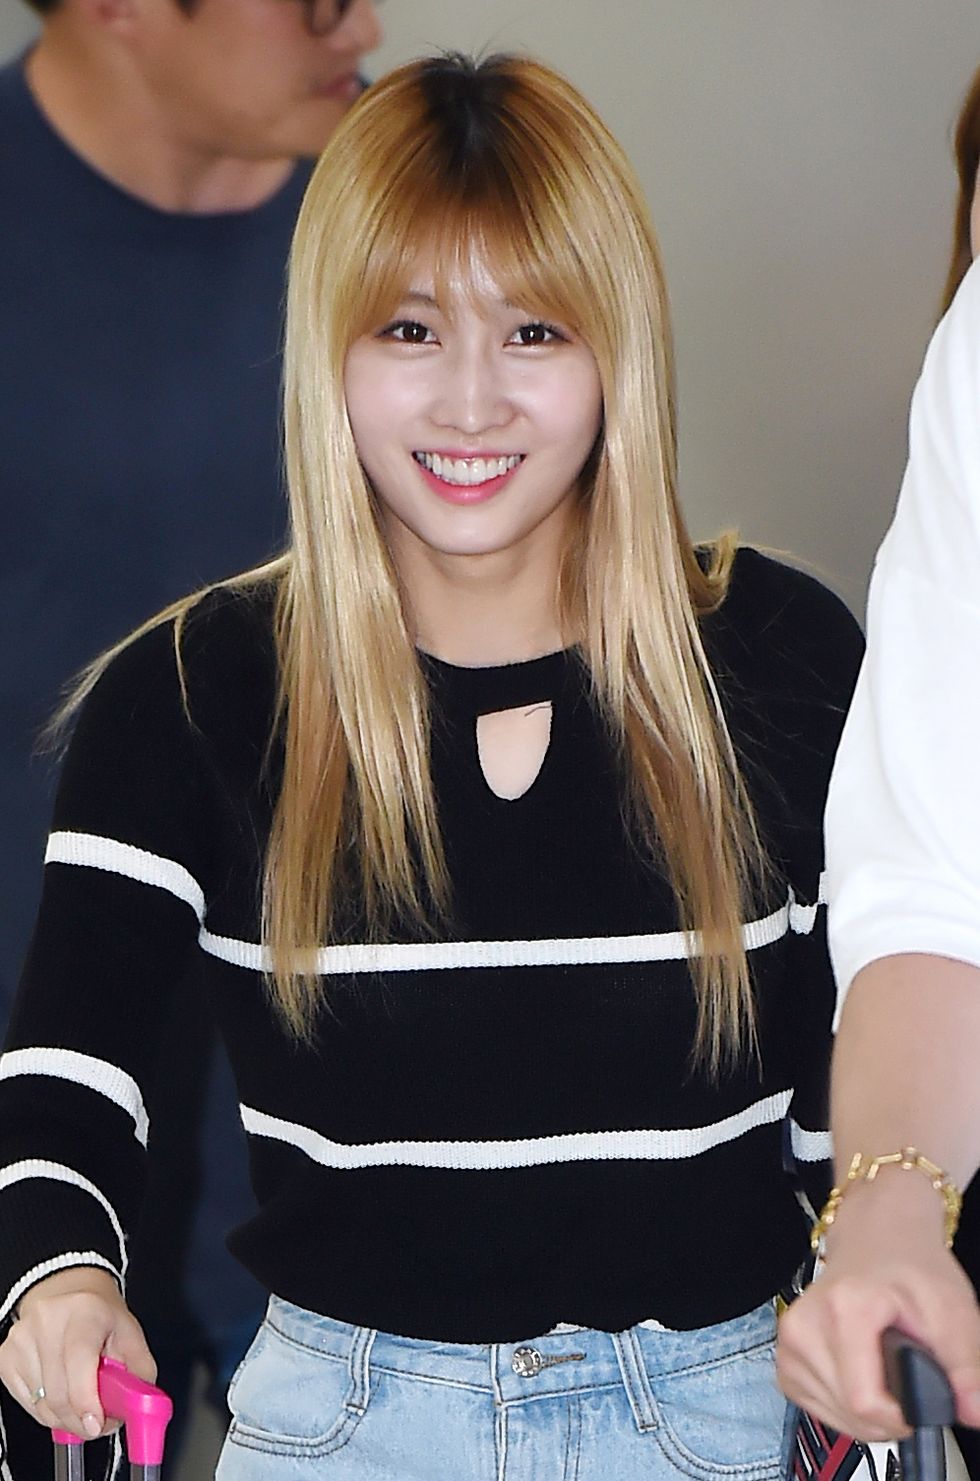 momo of twice arrived at gimpo international airport on september 5, 2016 in south korea 2016 09 05